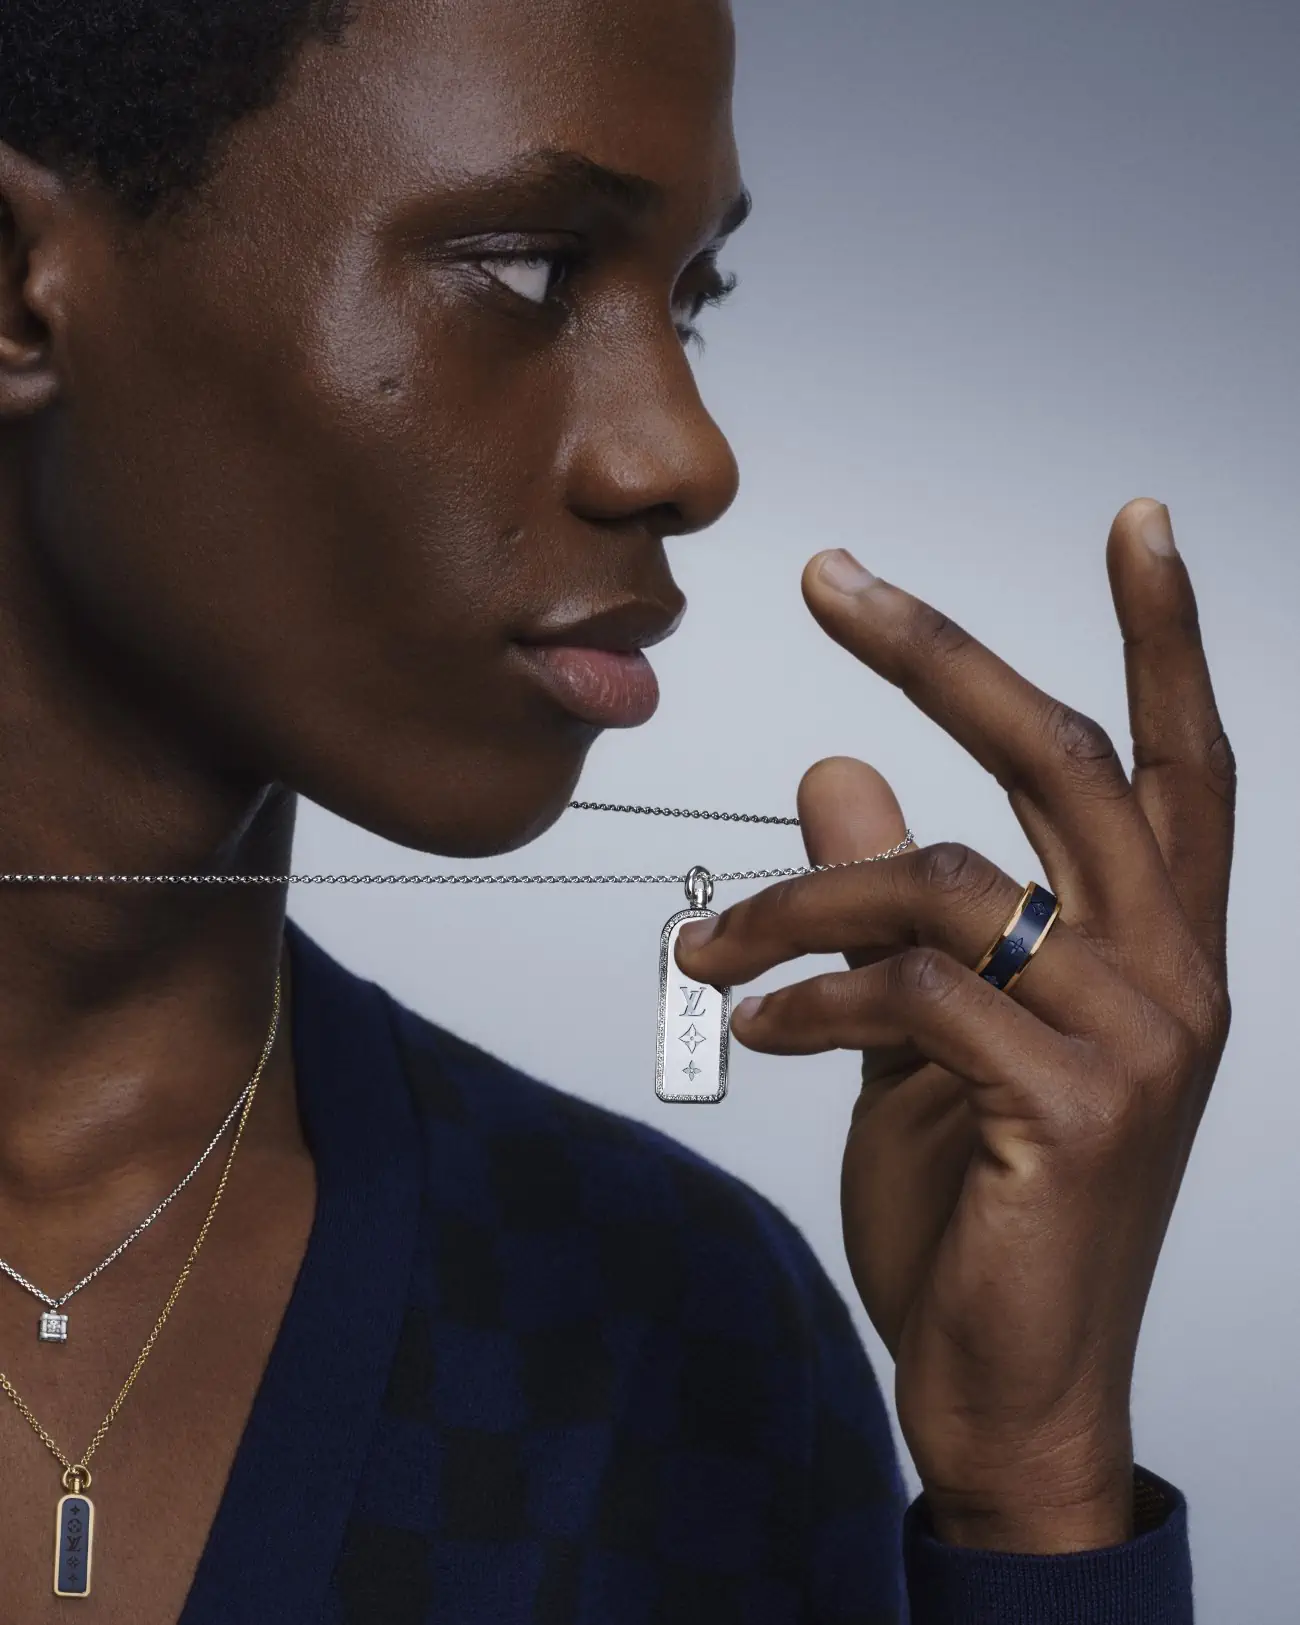 “Les Gastons Vuitton”, Louis Vuitton's bold new jewelry line for the modern man